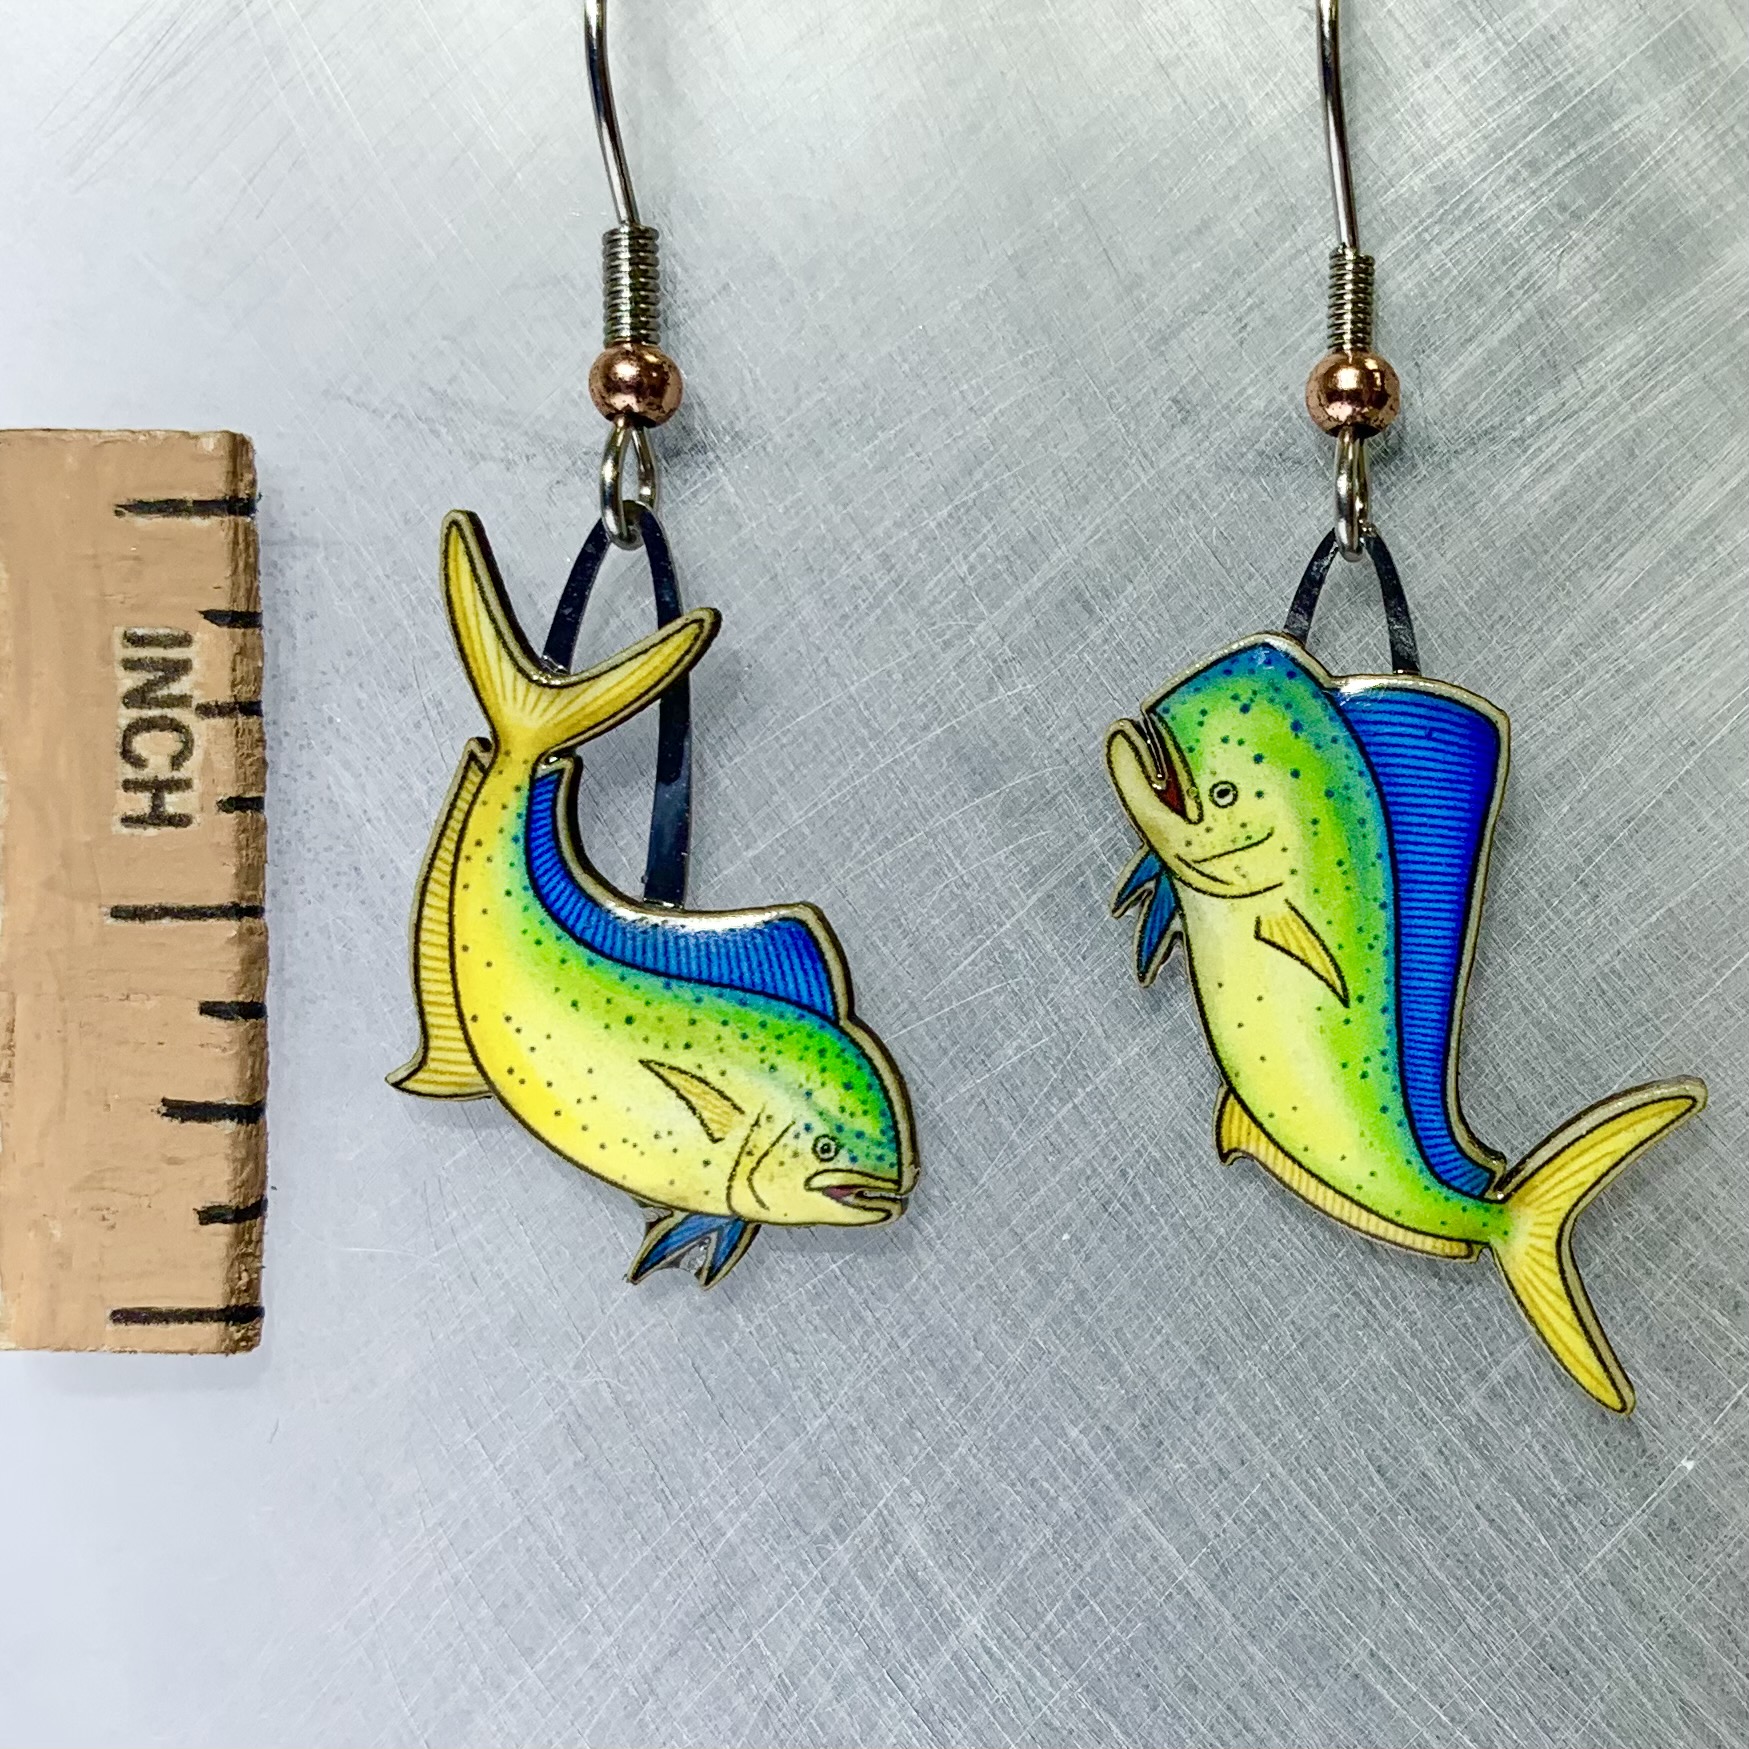 Picture shown is of 1 inch tall pair of earrings of the fish the Dolphinfish (Mahi-Mahi).